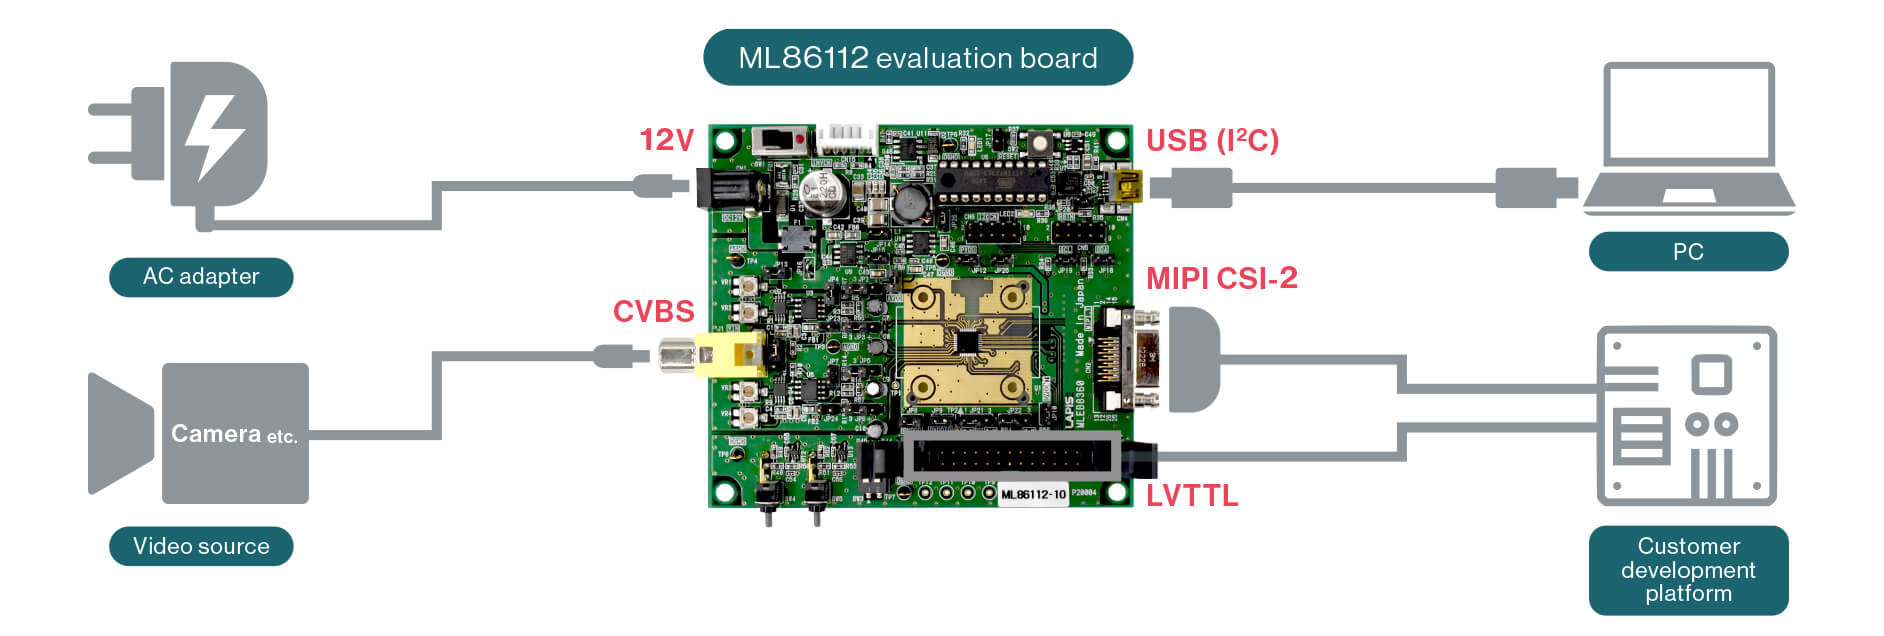 ML86112 evaluation board connection image